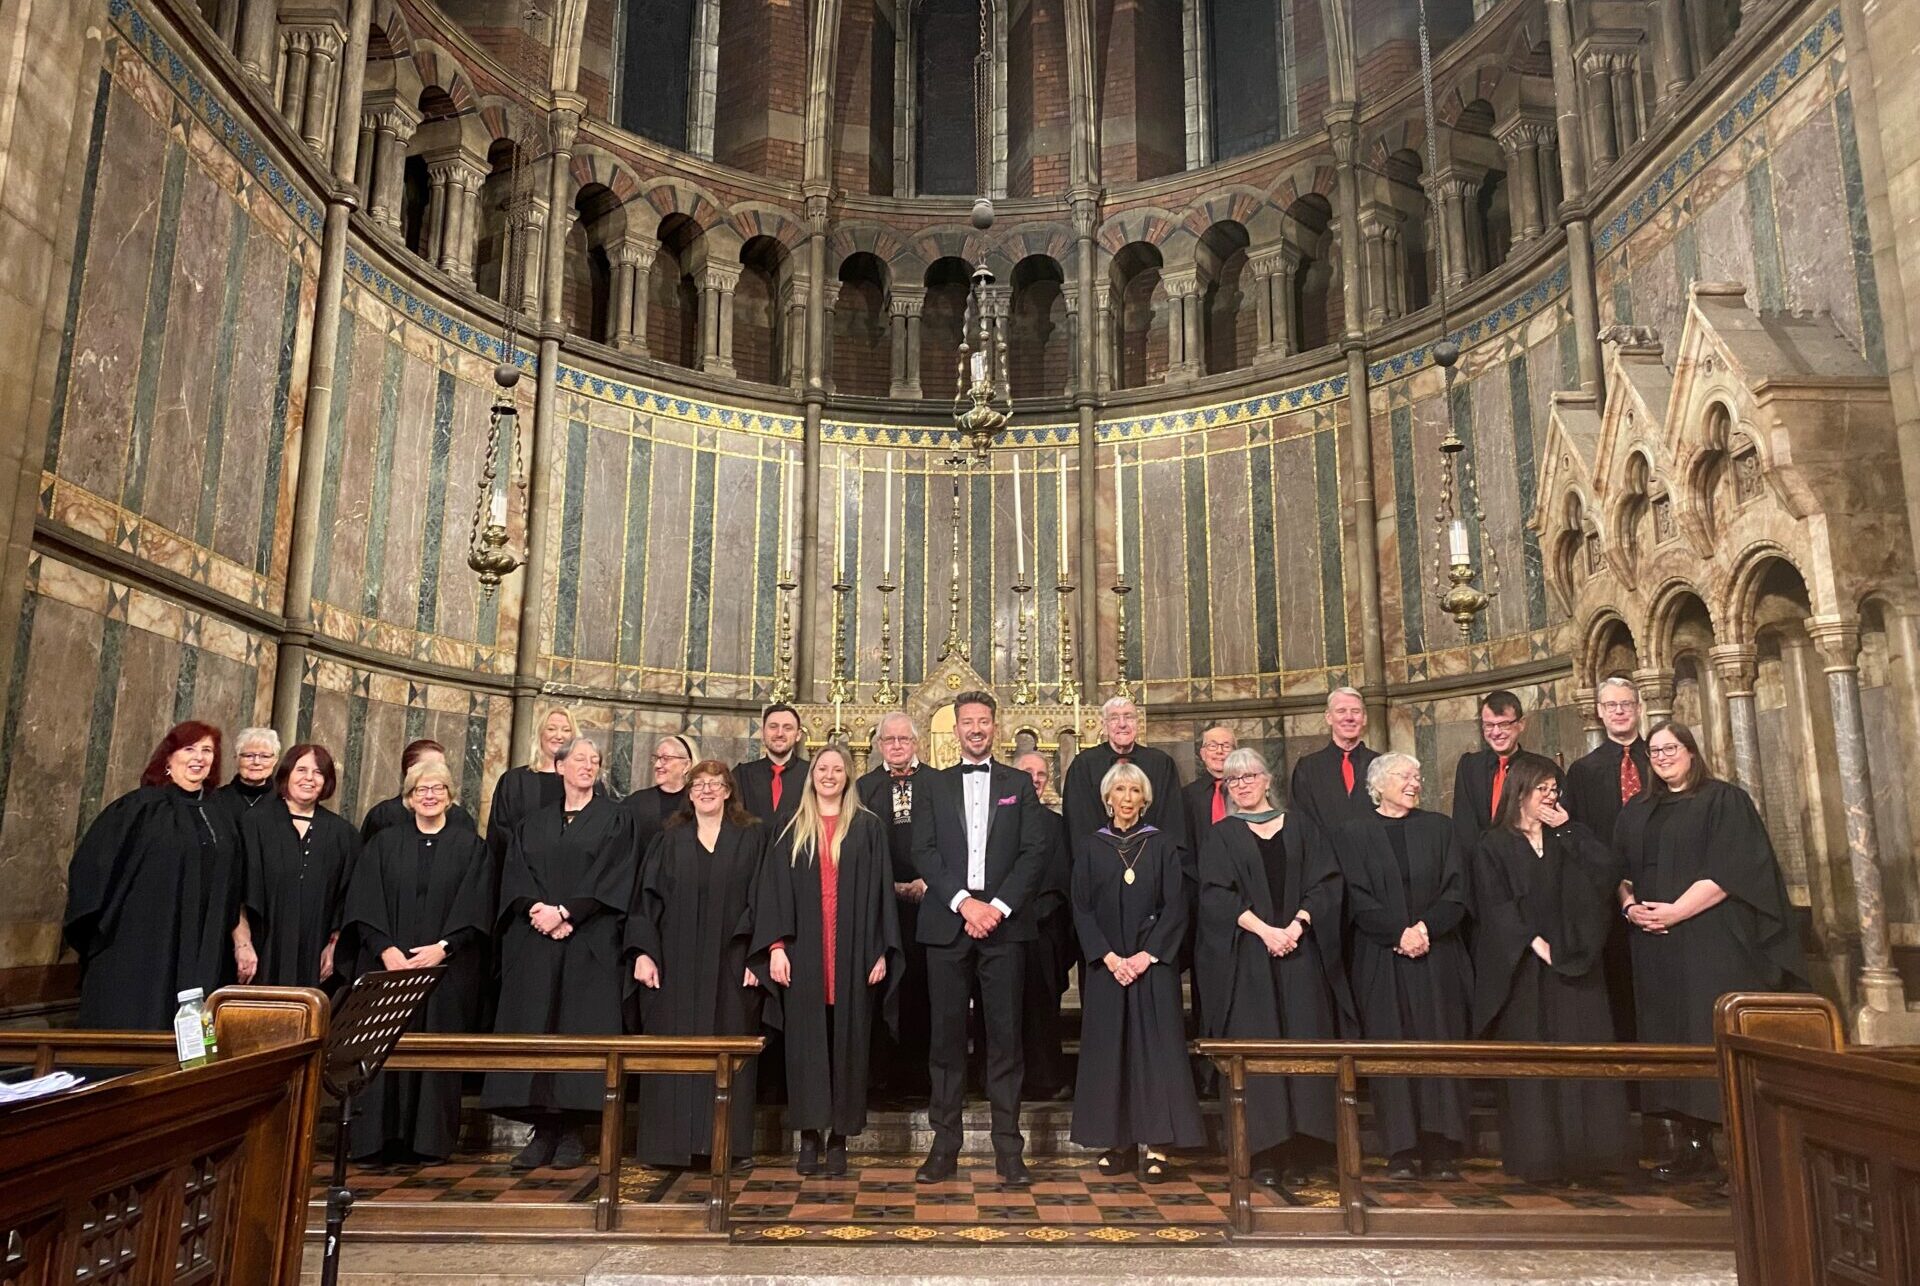 A choir stood in front of an altar in a church.